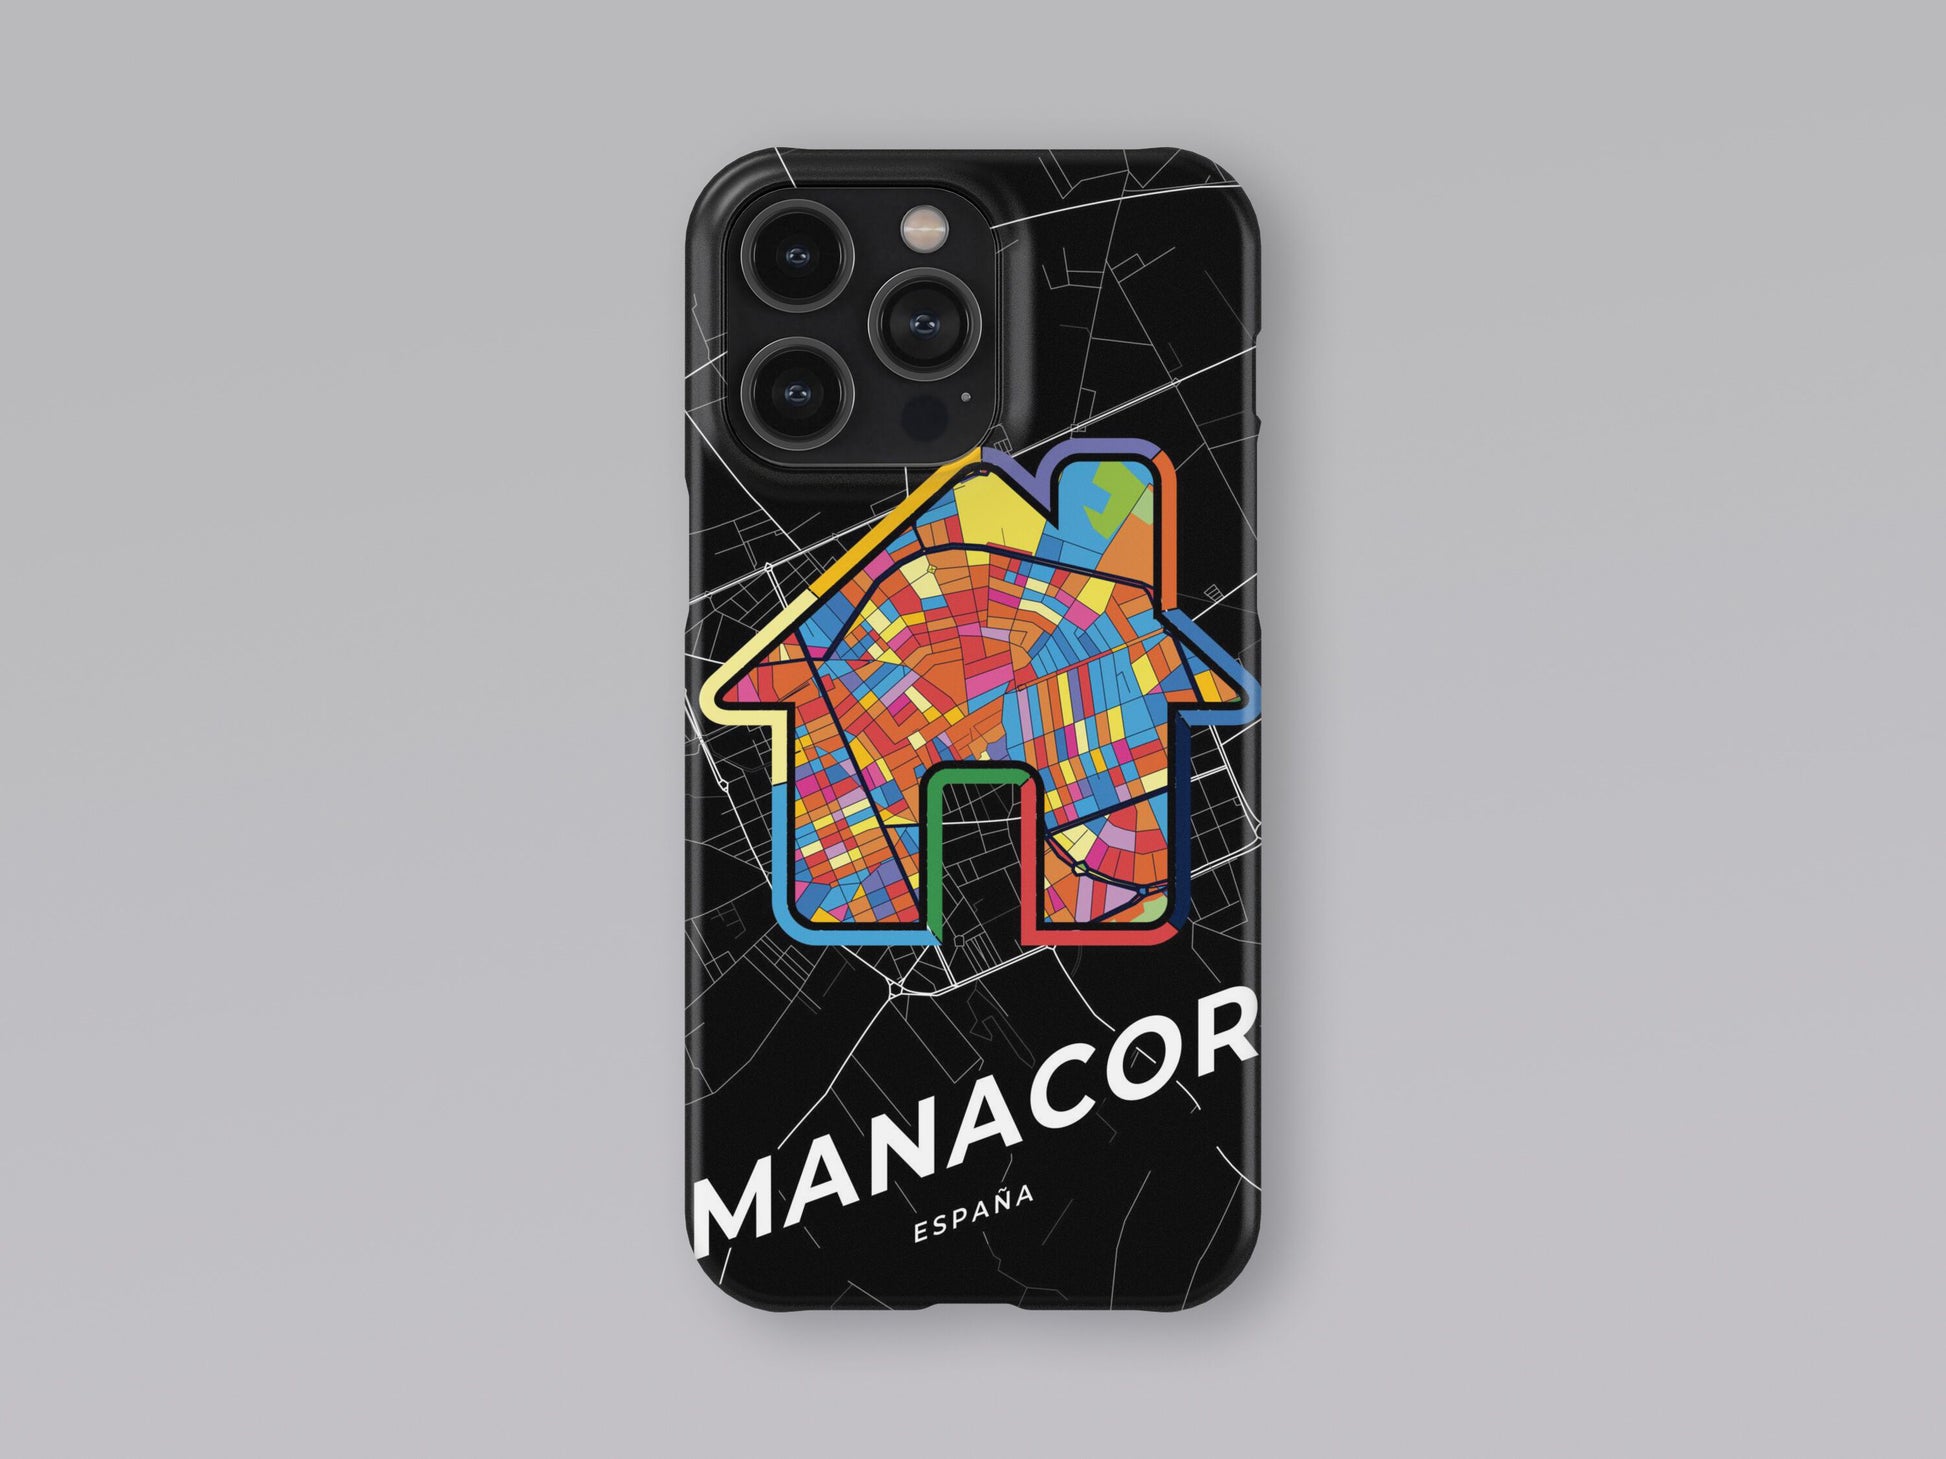 Manacor Spain slim phone case with colorful icon. Birthday, wedding or housewarming gift. Couple match cases. 3